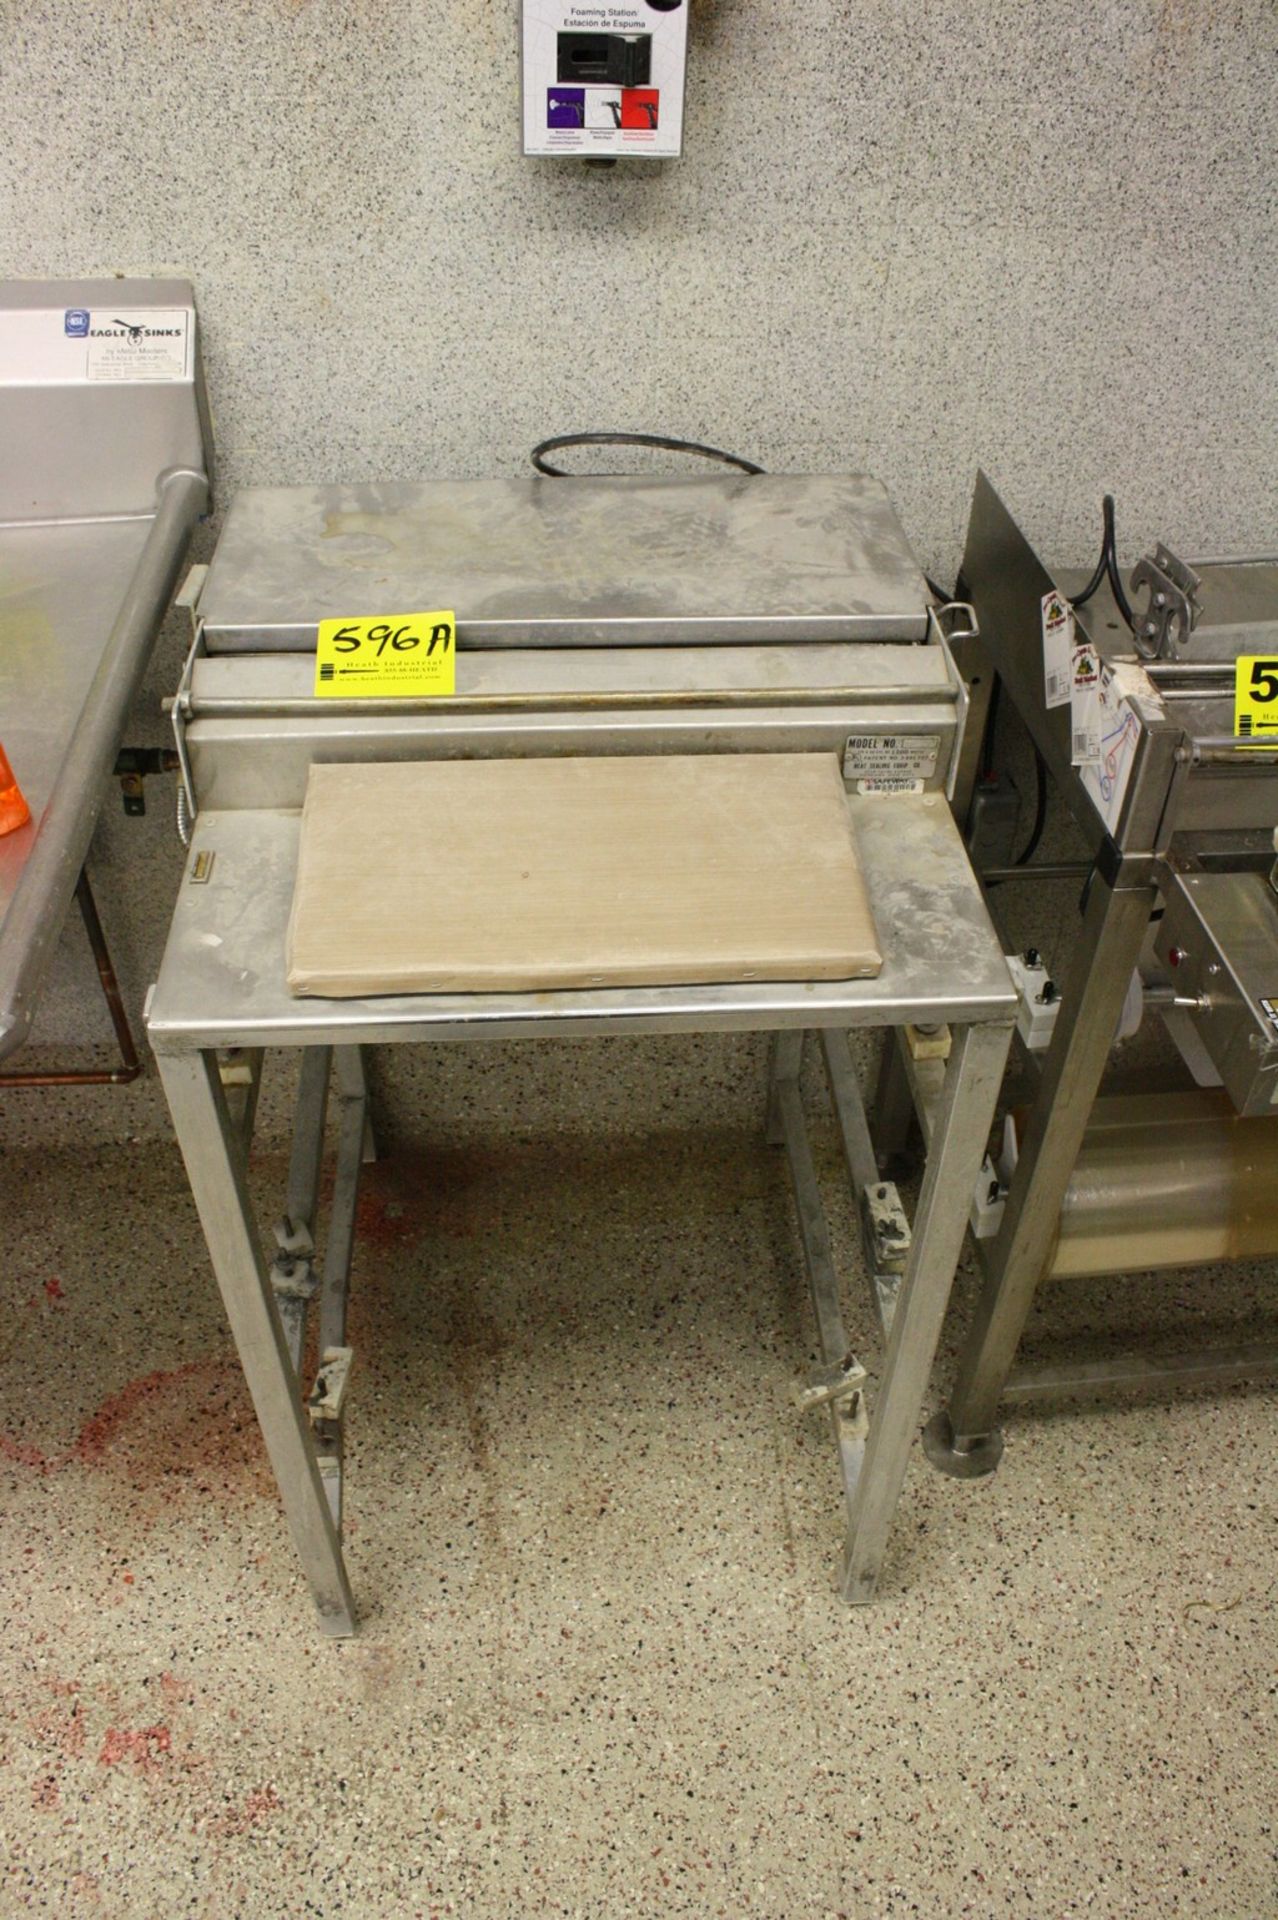 HEAT SEALING EQUIP CO., MODEL 104A WRAPPING STATION